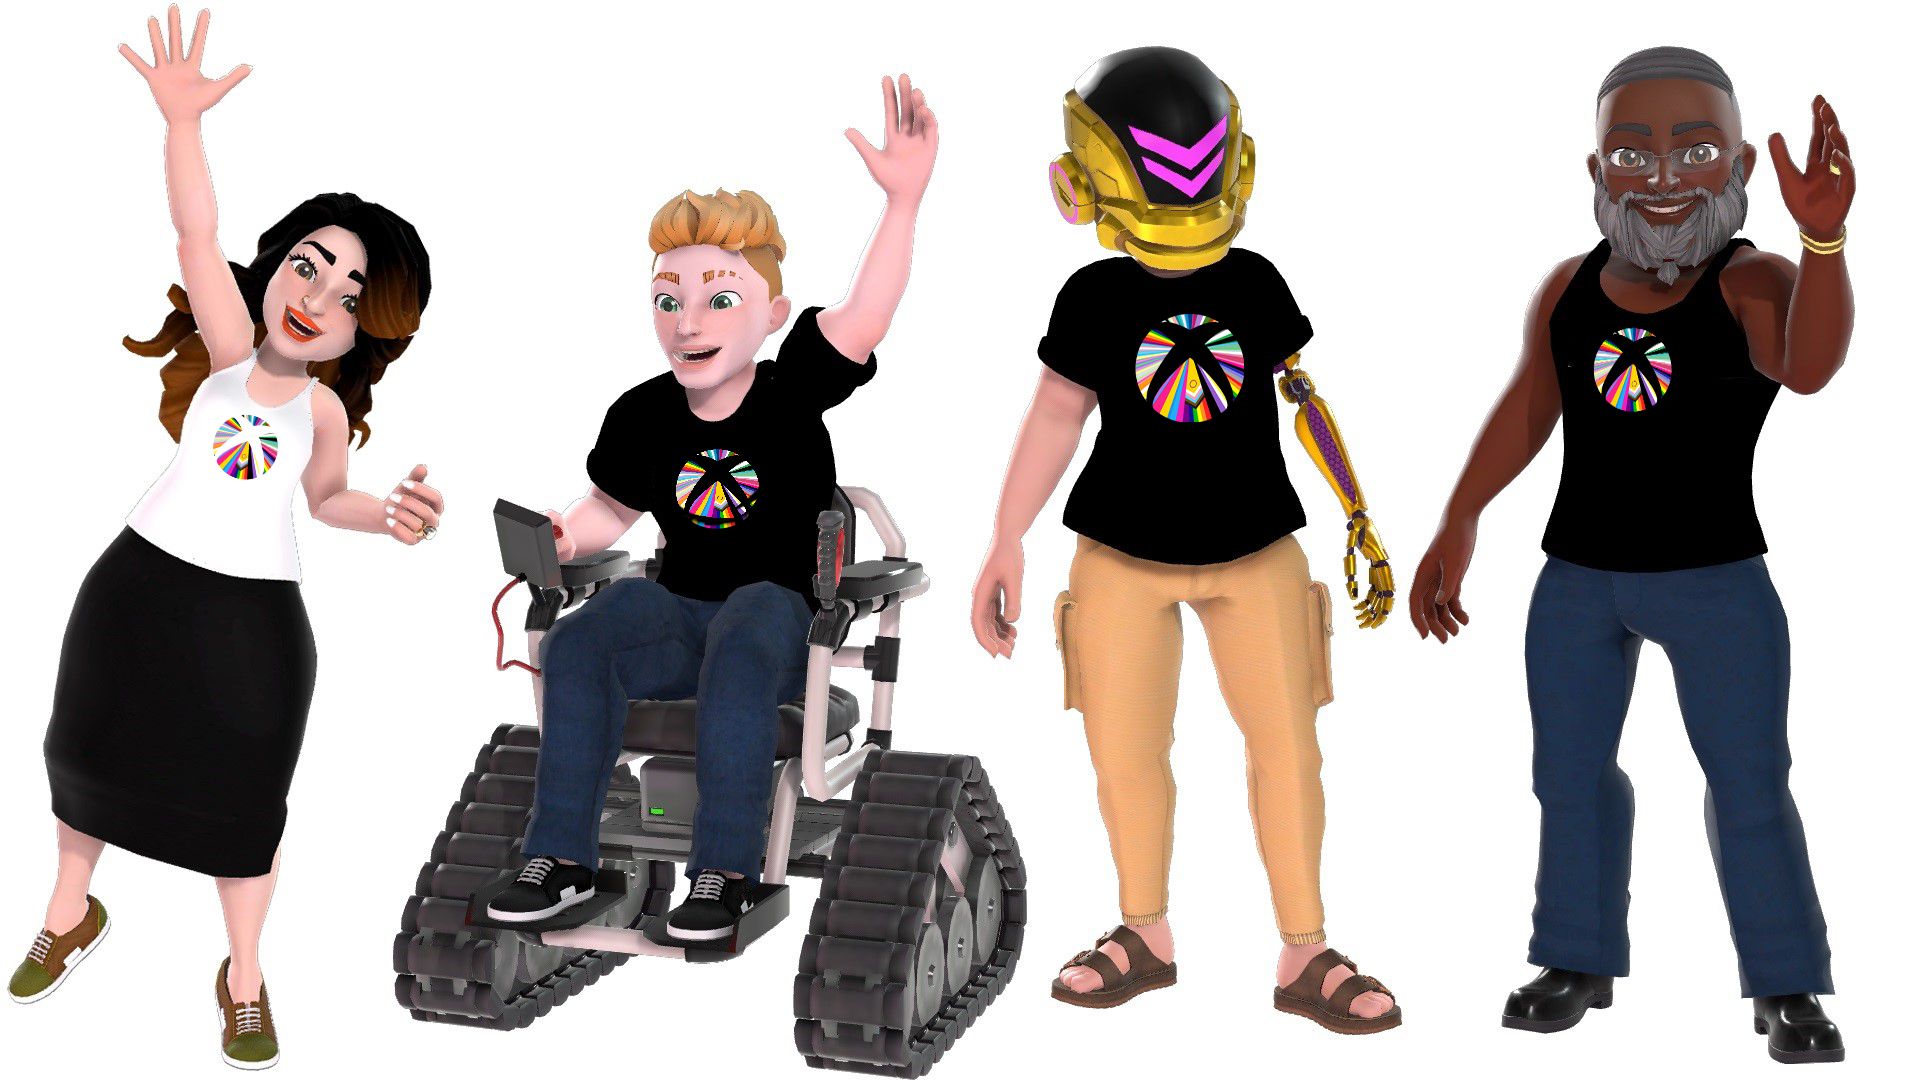 Four Xbox avatars wearing Pride logo’d gear – first is a woman standing with her right arm raised wearing a white tank top with the Pride logo with a black skirt; next is a white man seated in a wheel chair wearing a black tshirt with the Pride logo and blue jeans; next is woman with a prosthetic left arm wearing a gold and pink Halo helmet, a black tshirt with Pride logo and peach colored pants; last is a black man with a gray beard standing wearing a black tank top with the Pride logo and black jeans.